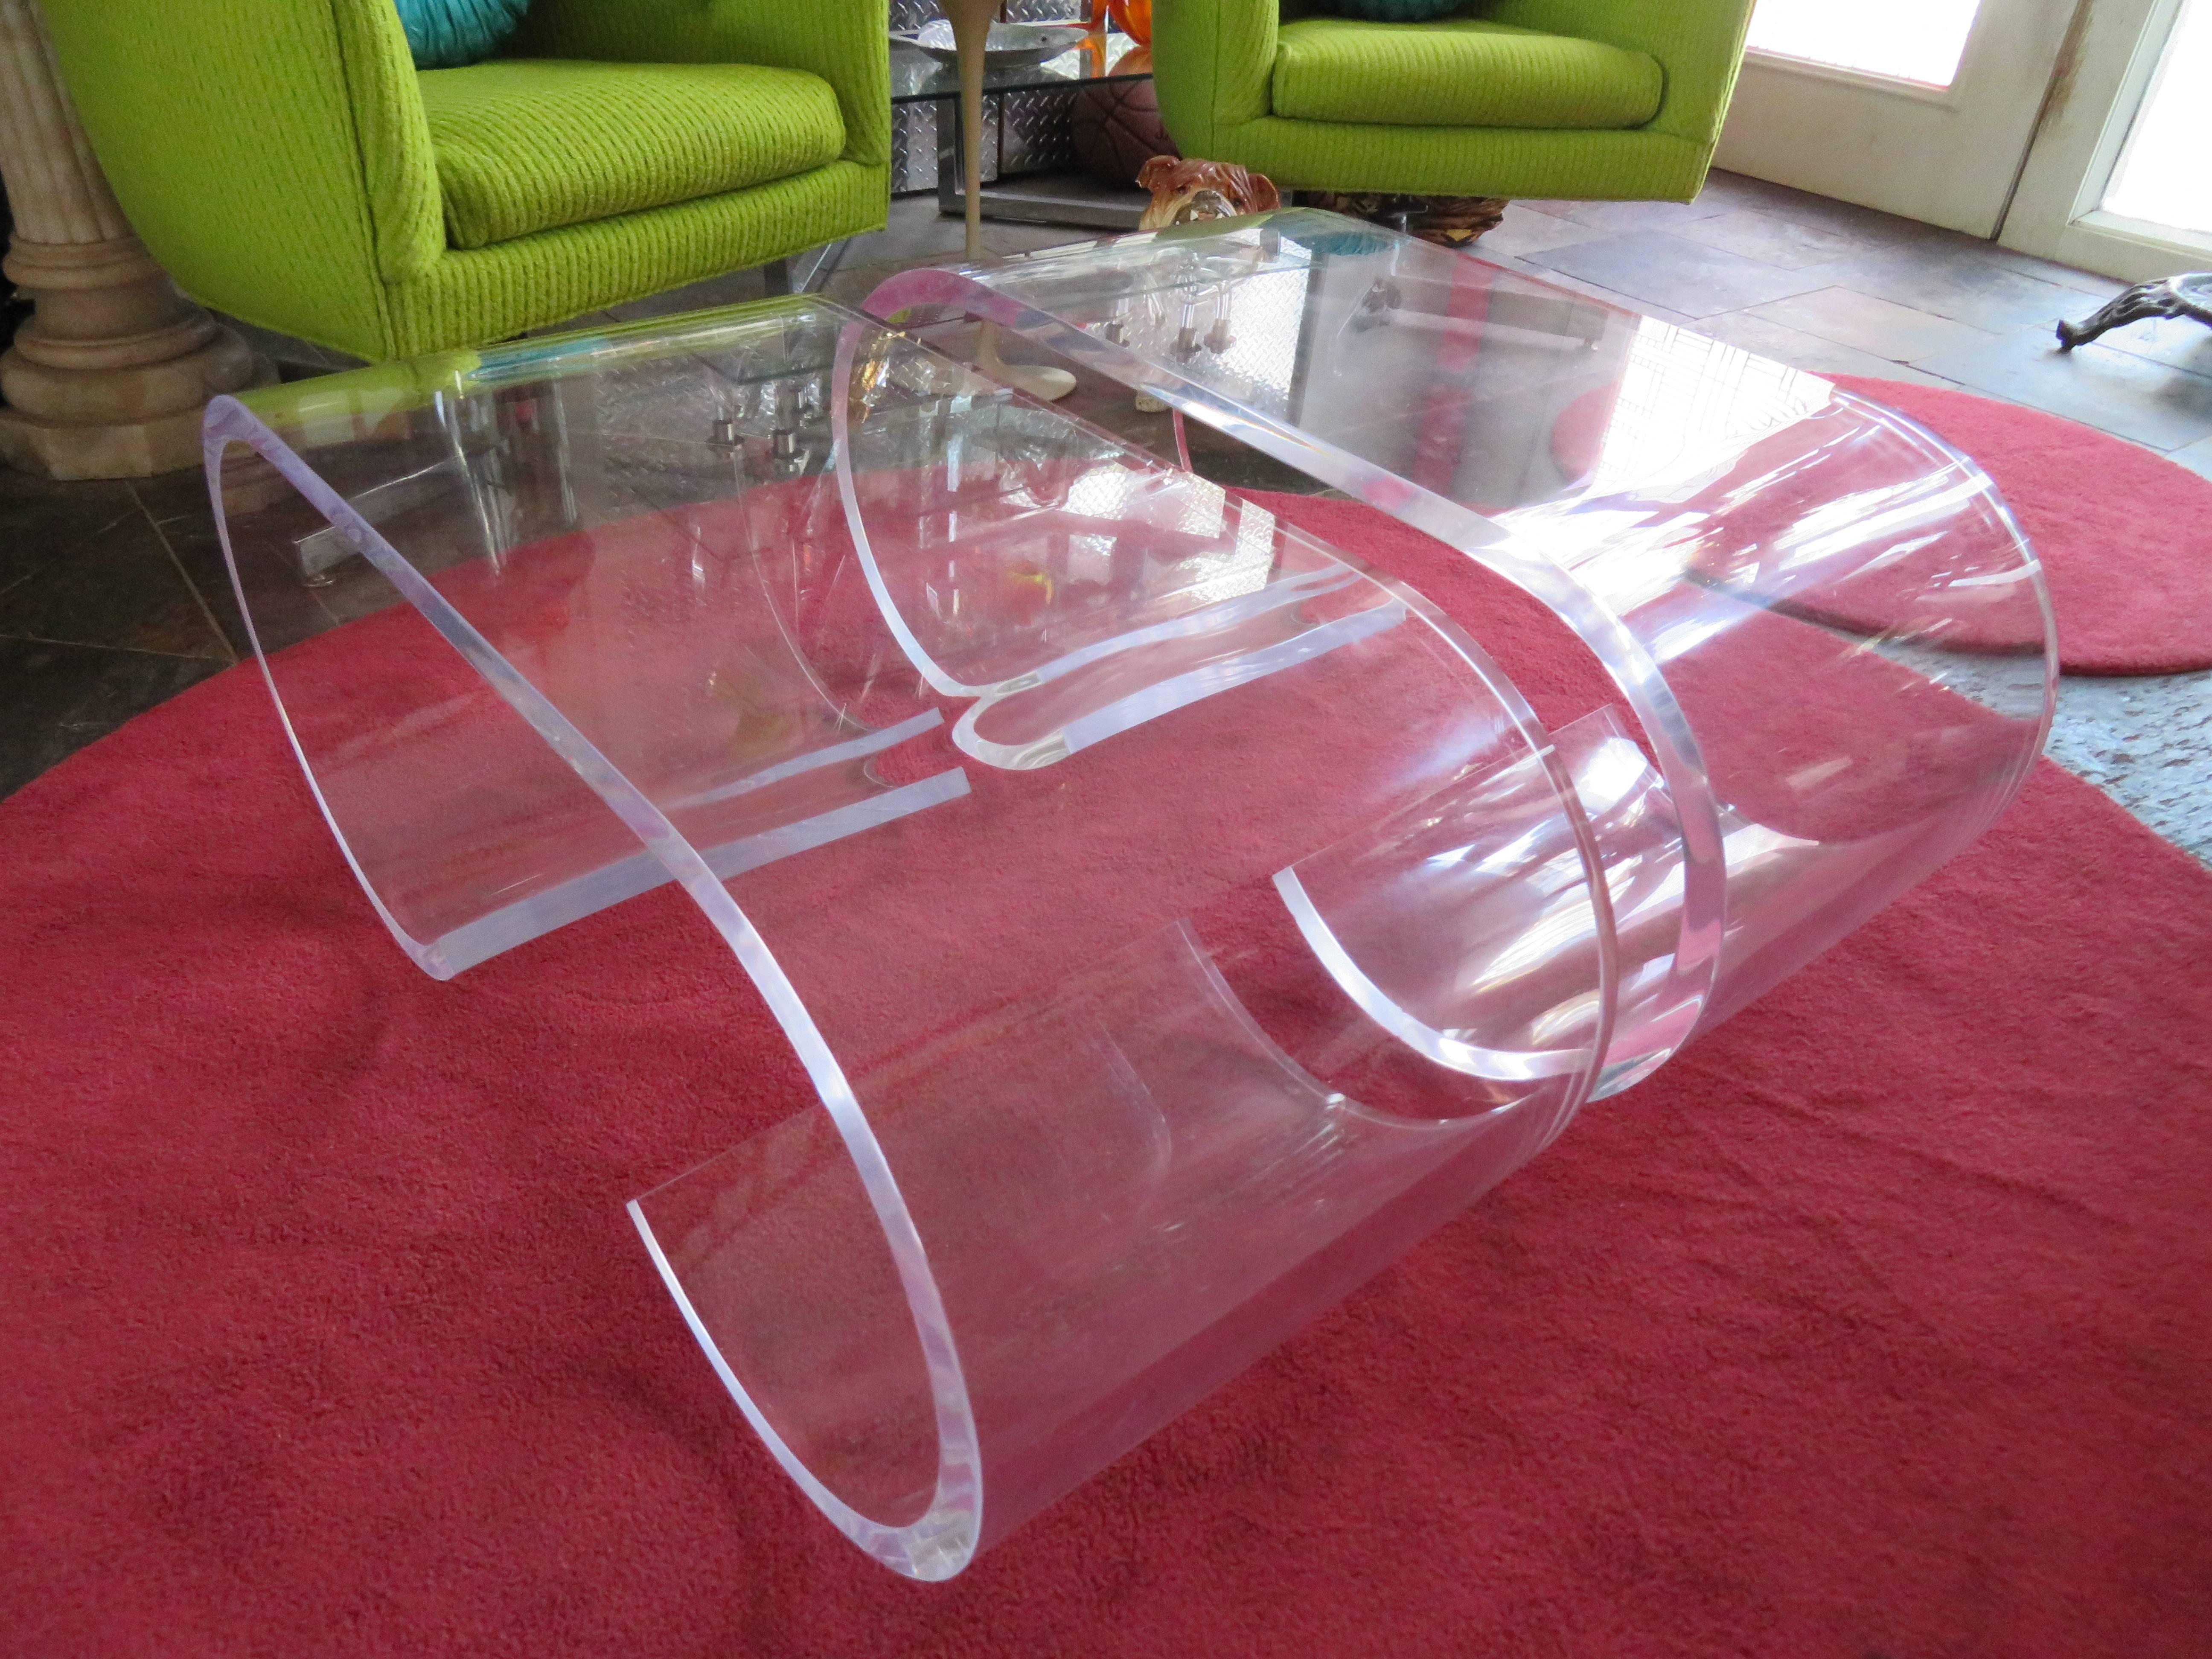 Awesome pair of Karl Springer style thick Lucite scroll coffee tables in excellent vintage condition. The last photo shows theses same table on the cover of Architectural Digest November 1977 super cool. If having one isn’t super fabulous enough we